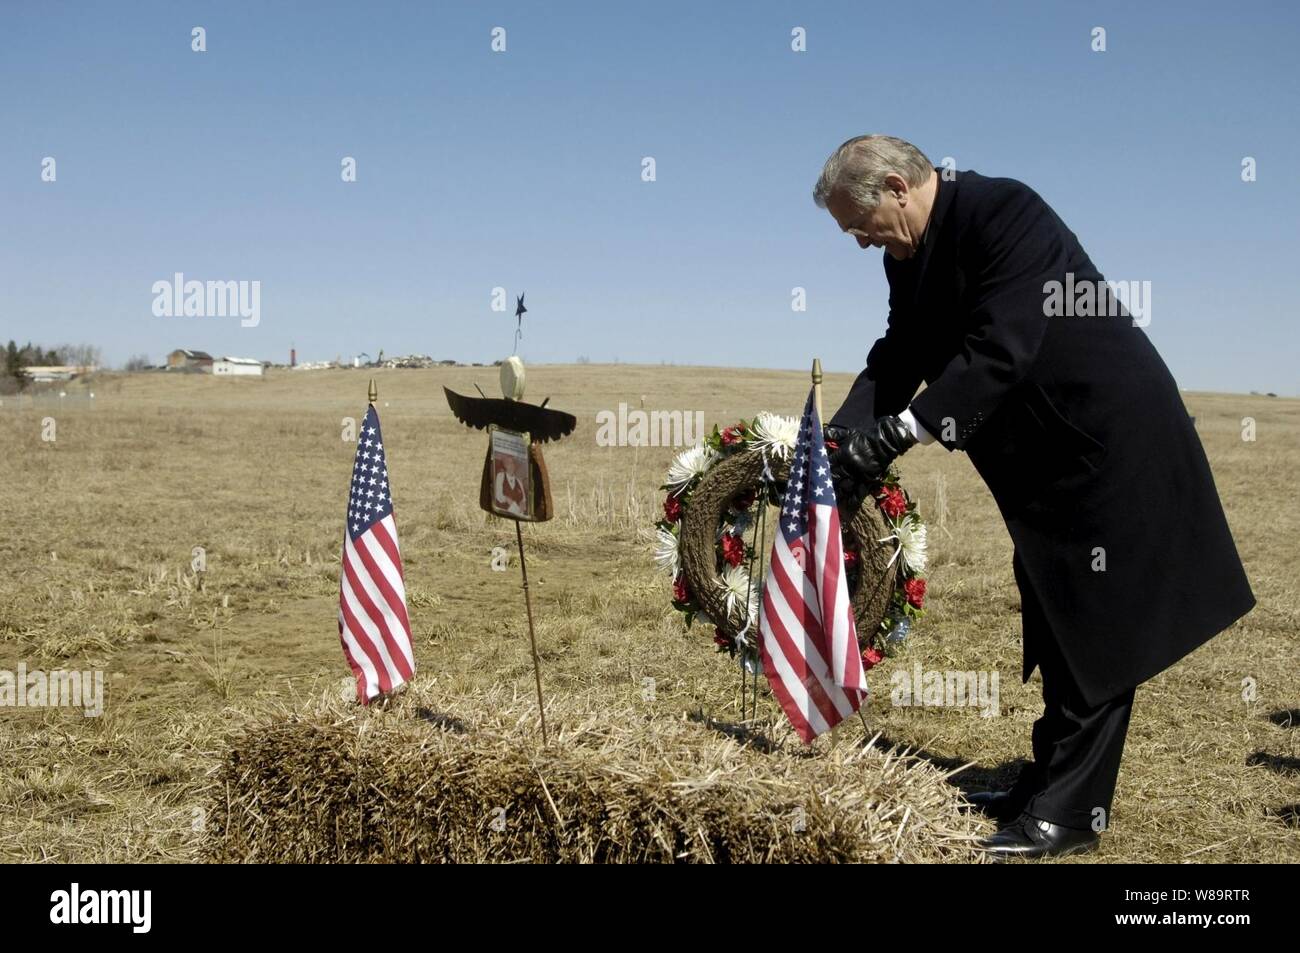 Secretary of Defense Donald H. Rumsfeld lays a wreath at the crash site of United Airlines Flight 93 in Shanksville, Pa., on March 27, 2006.  A memorial is being built to commemorate the victims that lost their lives overtaking a terrorist hijacked airplane and saving the plane from continuing its mission on Sept. 11, 2001.  Rumsfeld was in Shanksville to visit the Flight 93 National Memorial and then continue on to the Army War College in Carlisle, Pa. Stock Photo